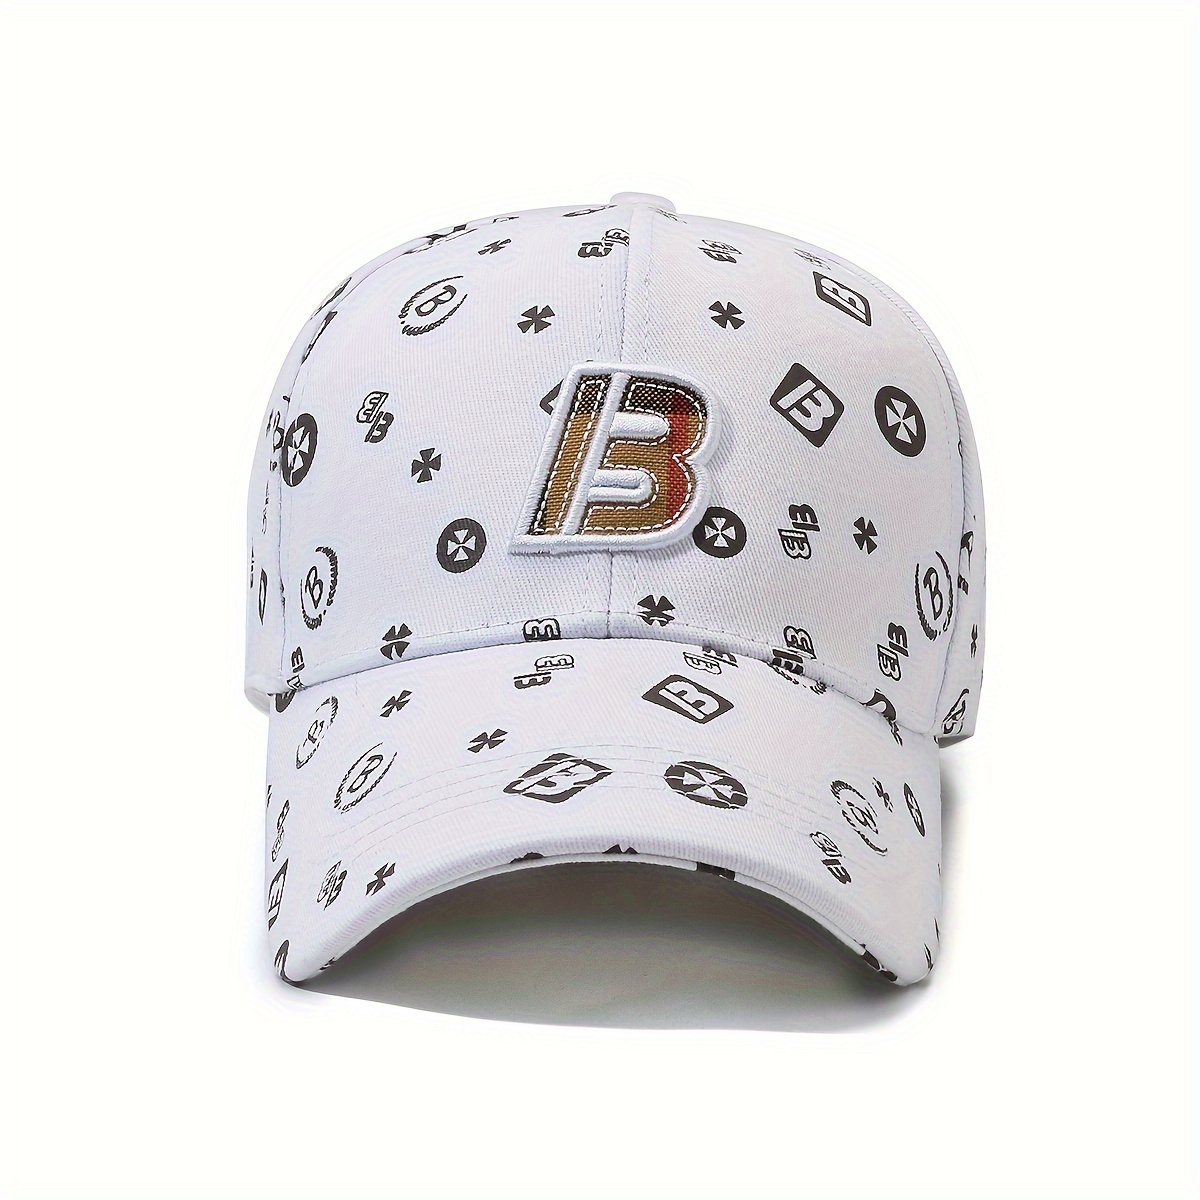 

Embroidered Letter B Baseball Cap, Unisex Casual Spring/fall Hat, Sun Protection Lightweight Peaked Hat